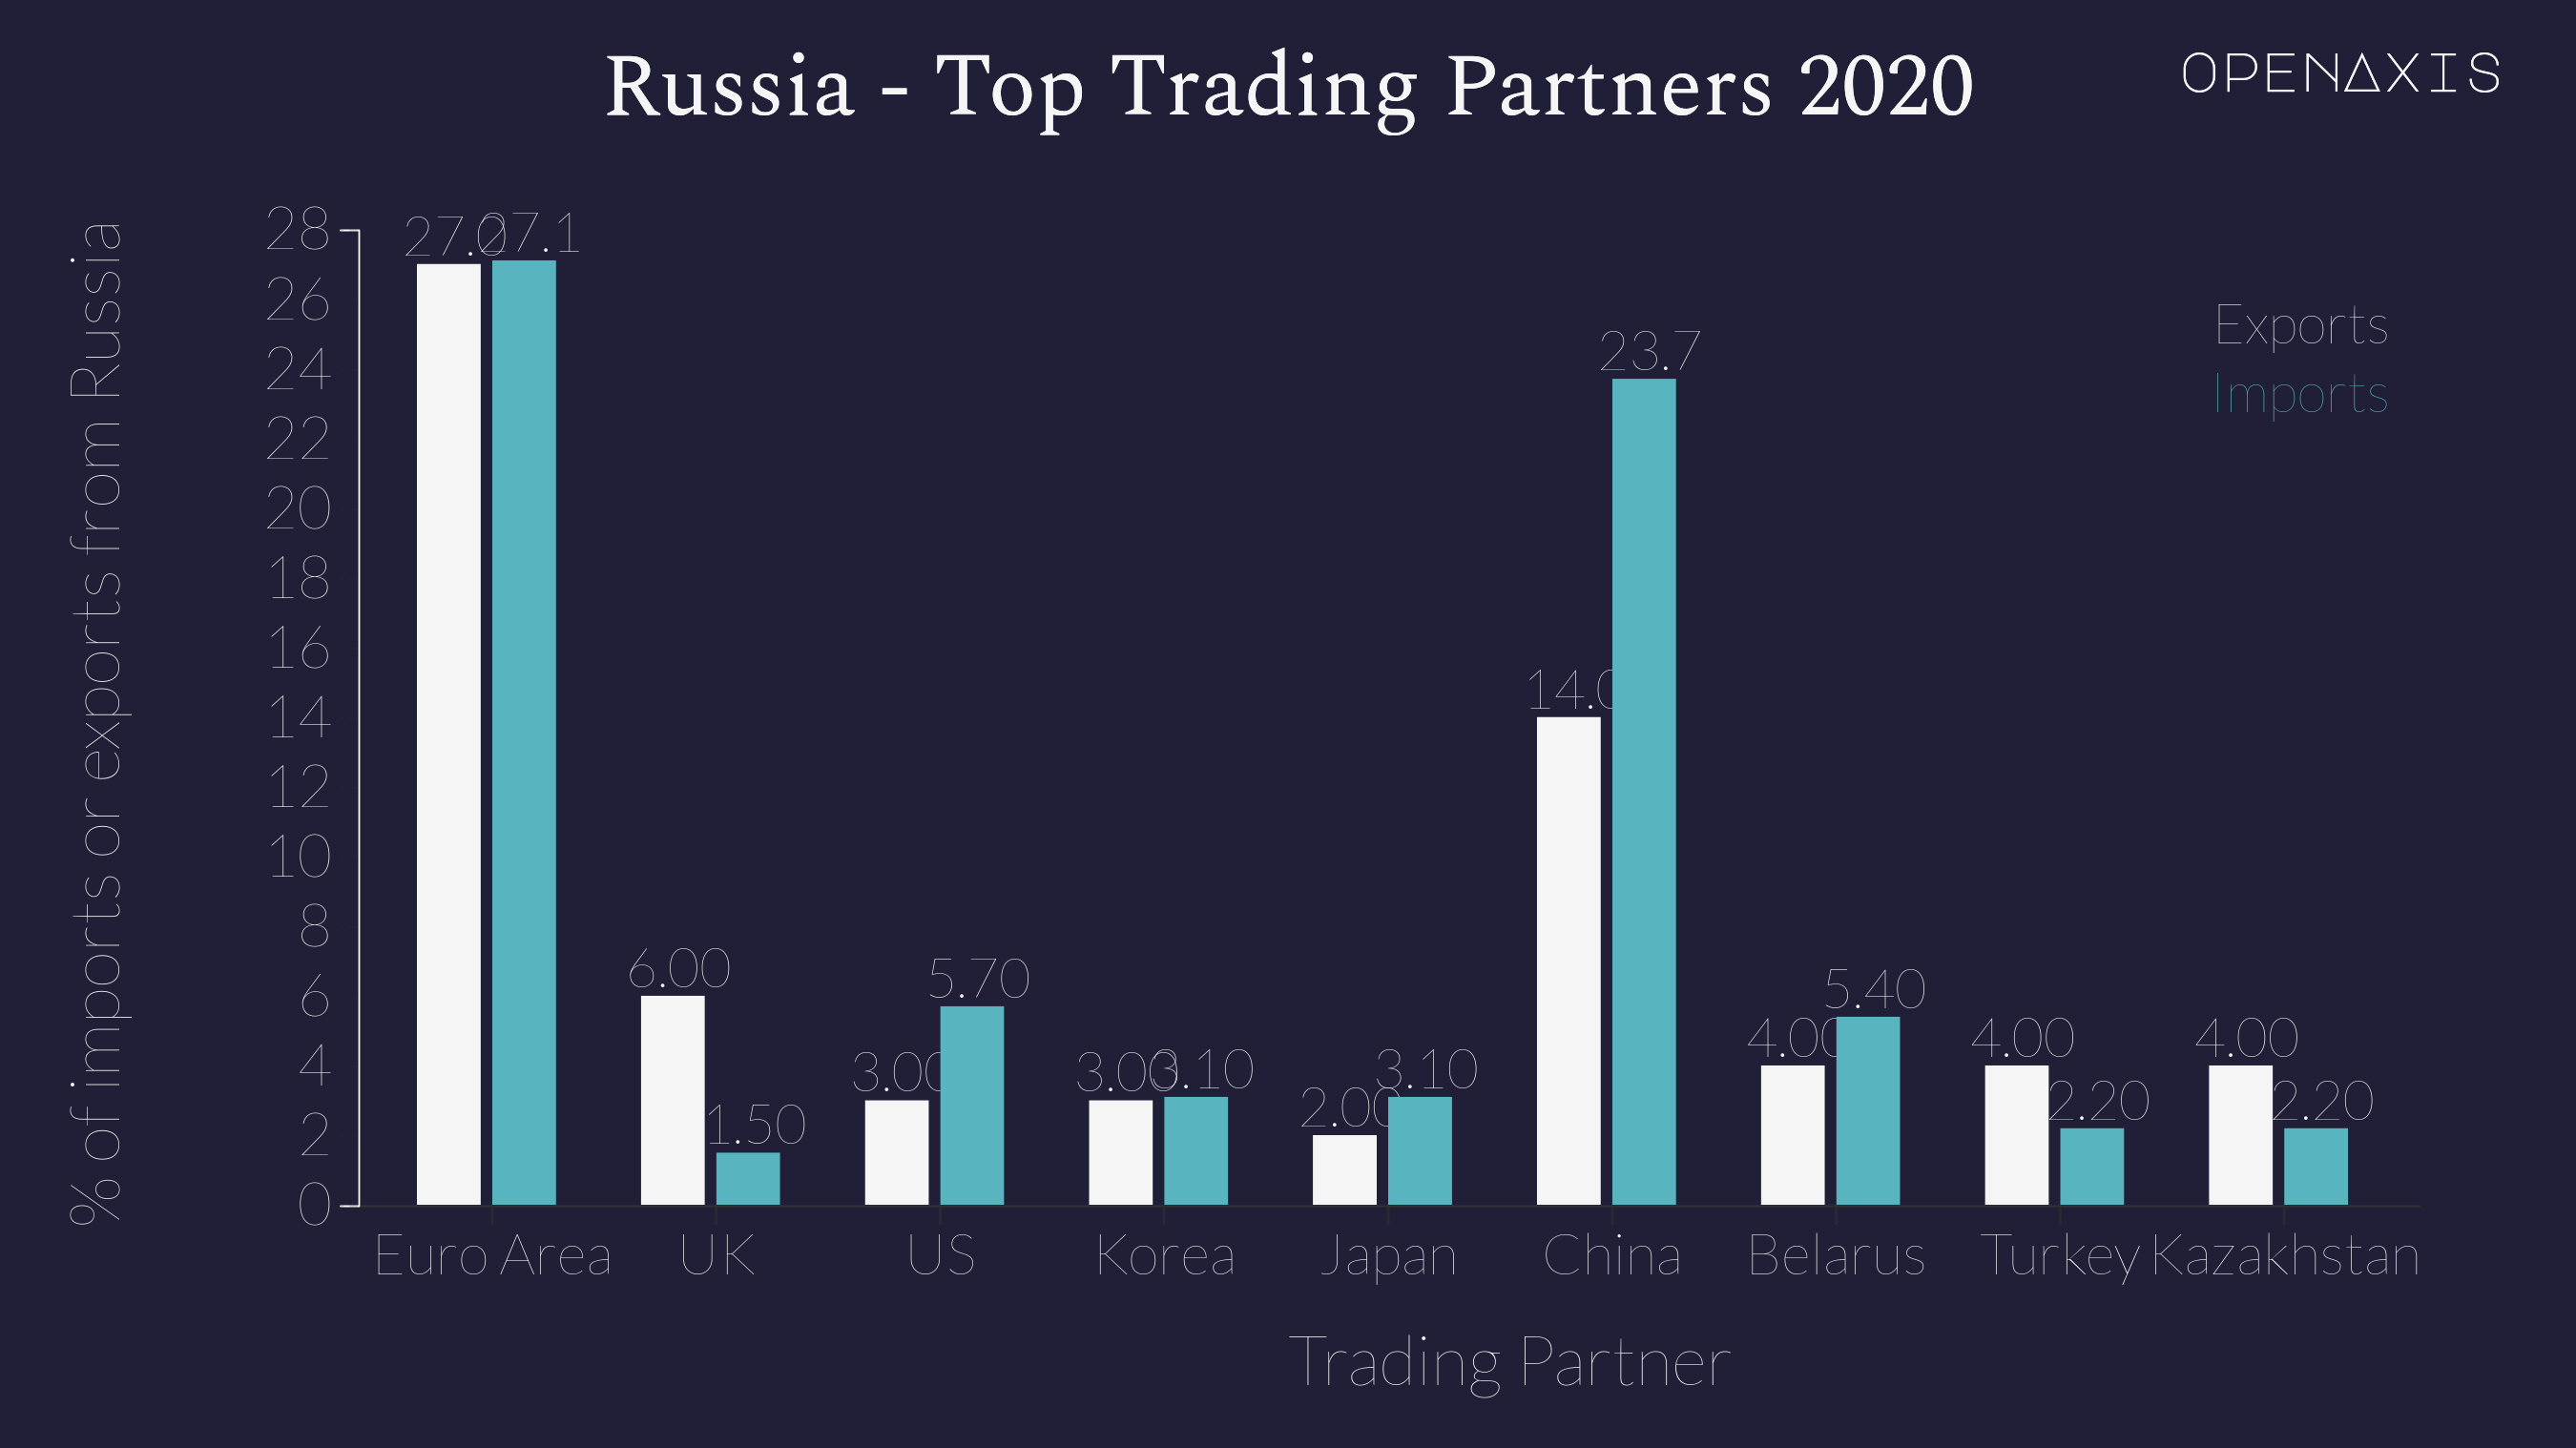 <p>Top trading partners of Russia in 2020</p><p><br /></p><p>﻿<a href="/search?q=%23economy" target="_self">#economy</a>﻿ ﻿<a href="/search?q=%23exports" target="_self">#exports</a>﻿ ﻿<a href="/search?q=%23ukraine" target="_self">#ukraine</a>﻿ ﻿<a href="/search?q=%23russia" target="_self">#russia</a>﻿ </p>